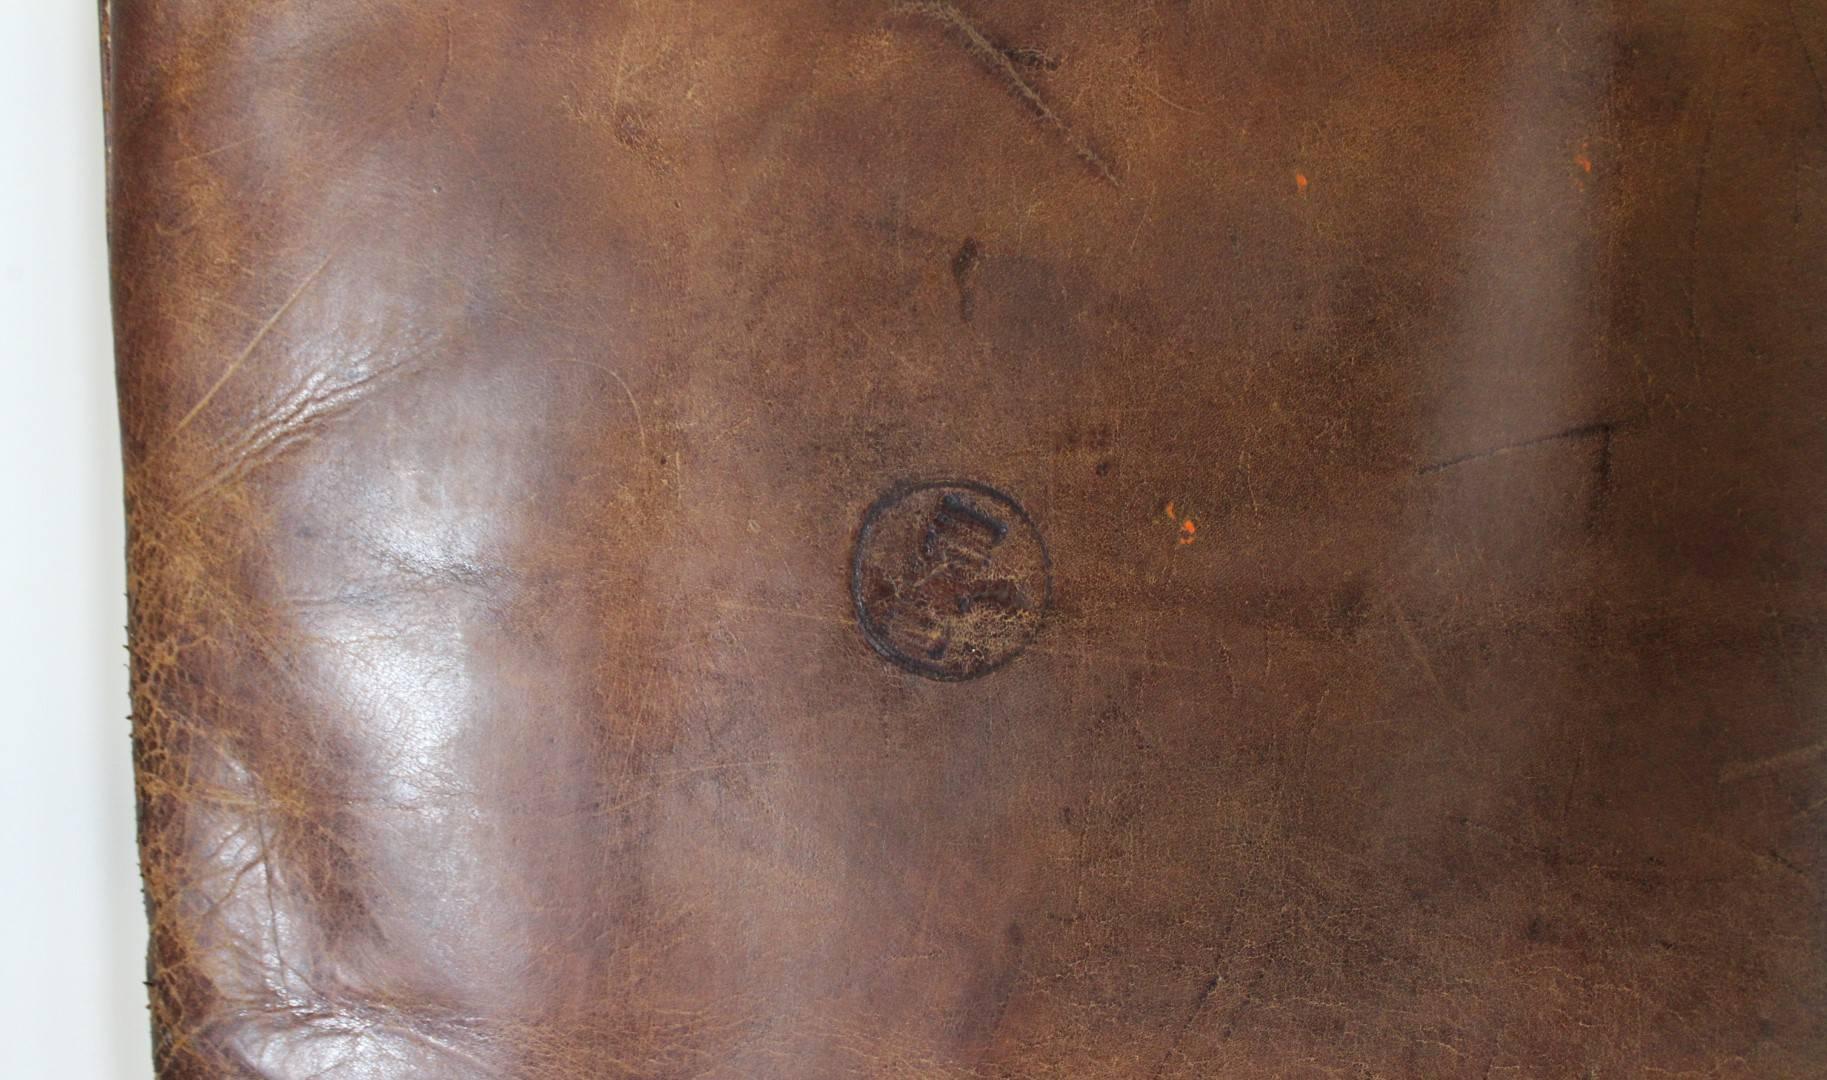 20th Century 1930s Leather Gym Mat